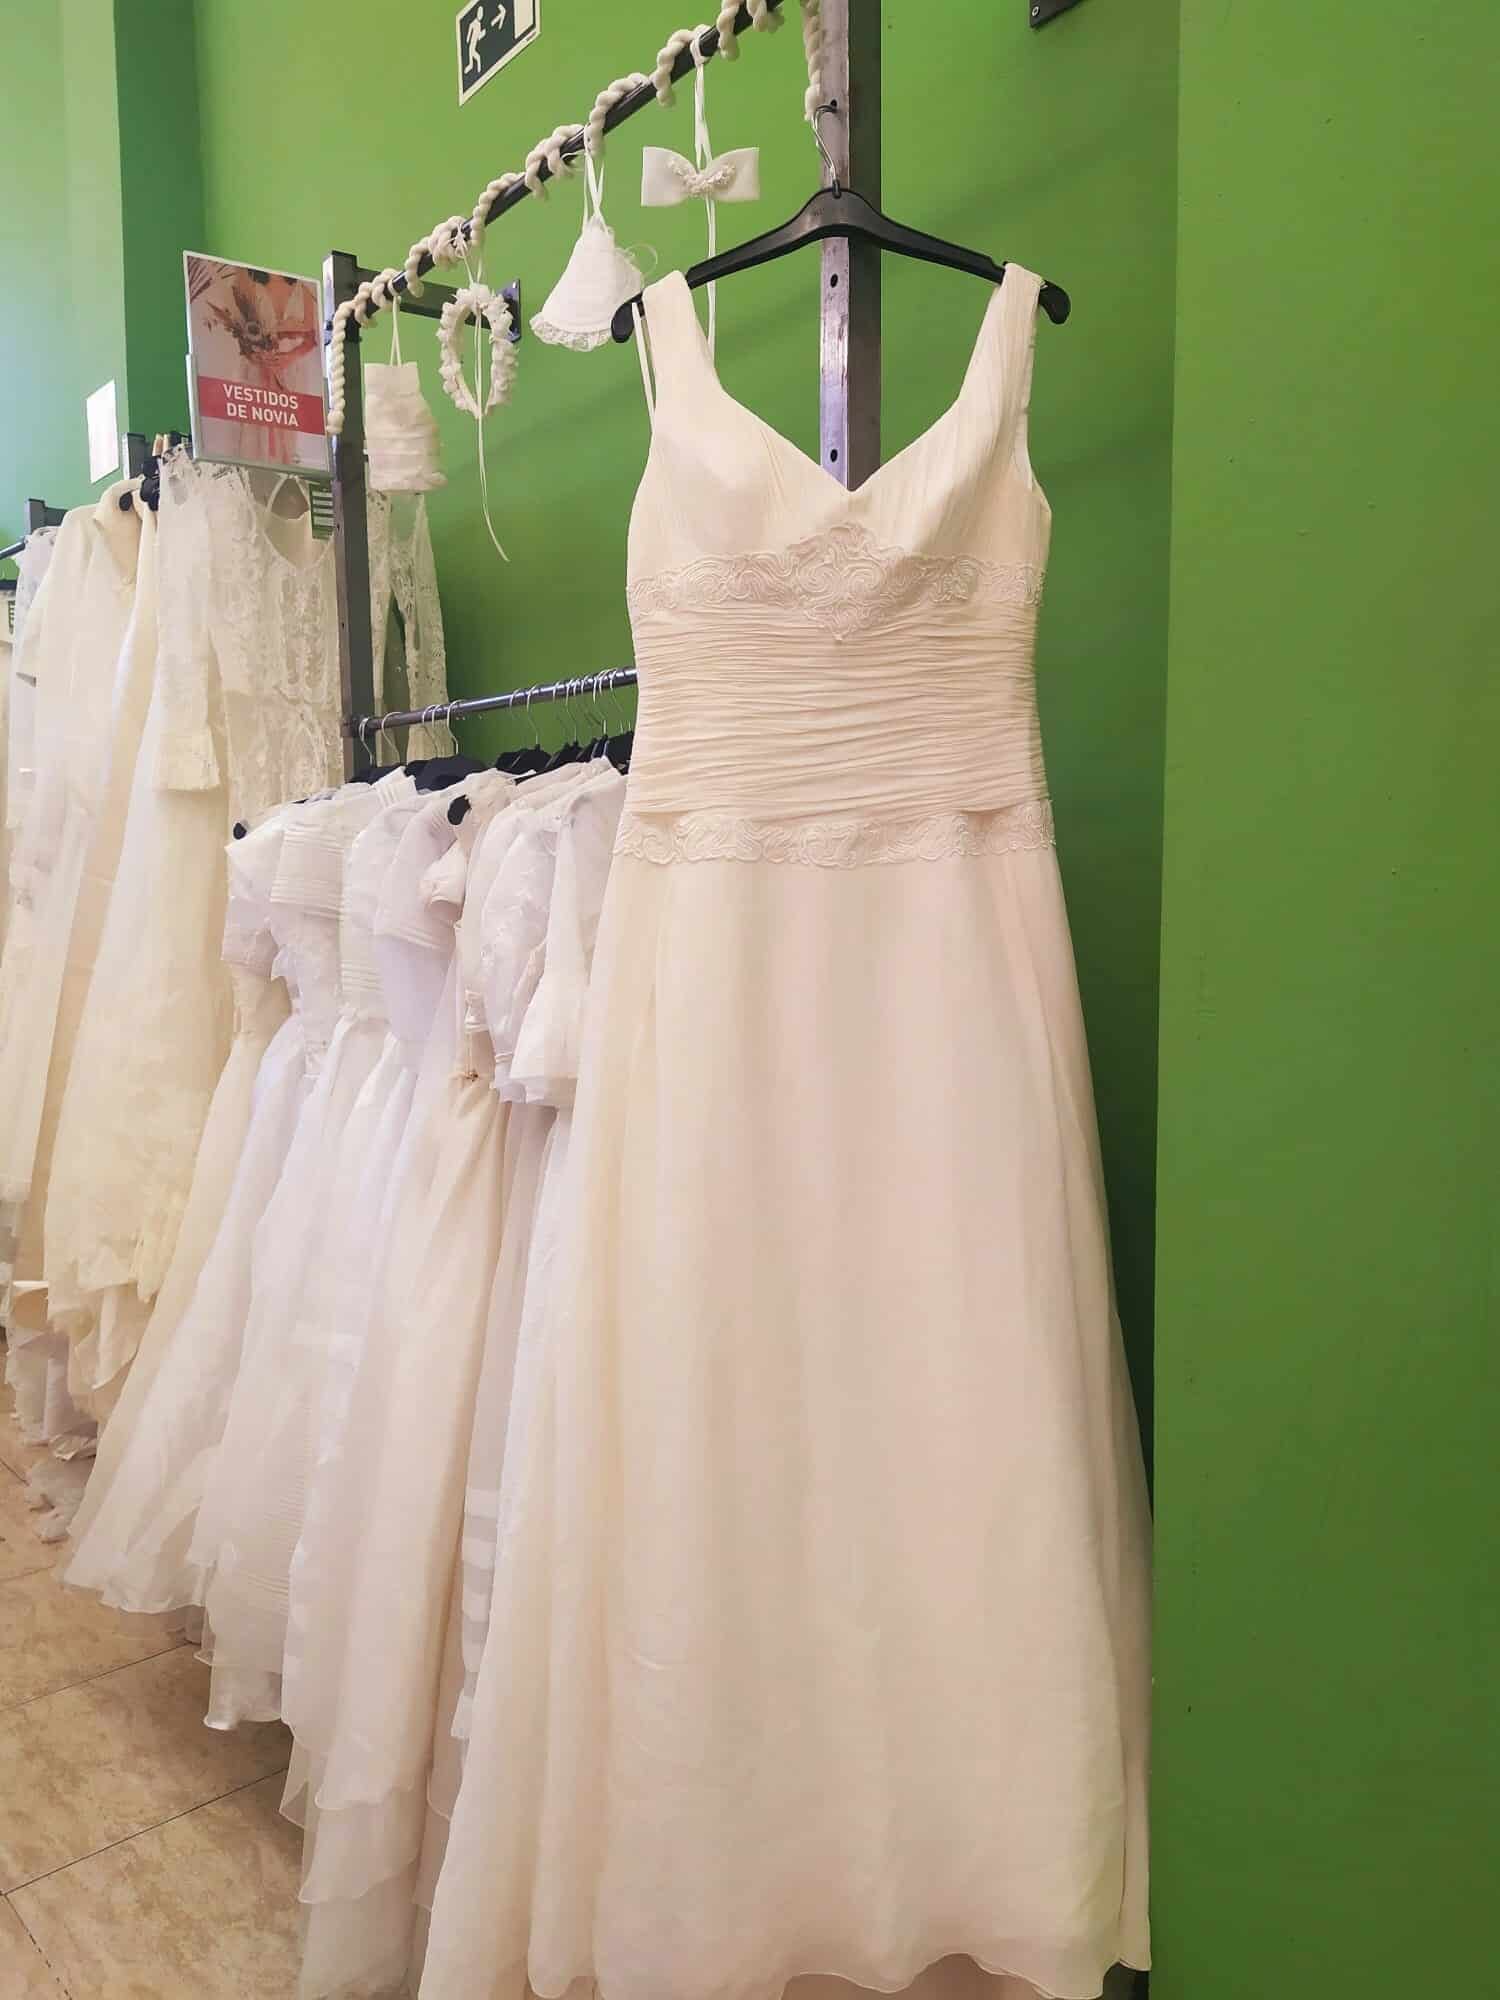 A unique opportunity: bridal gowns from 30 euros in Barcelona